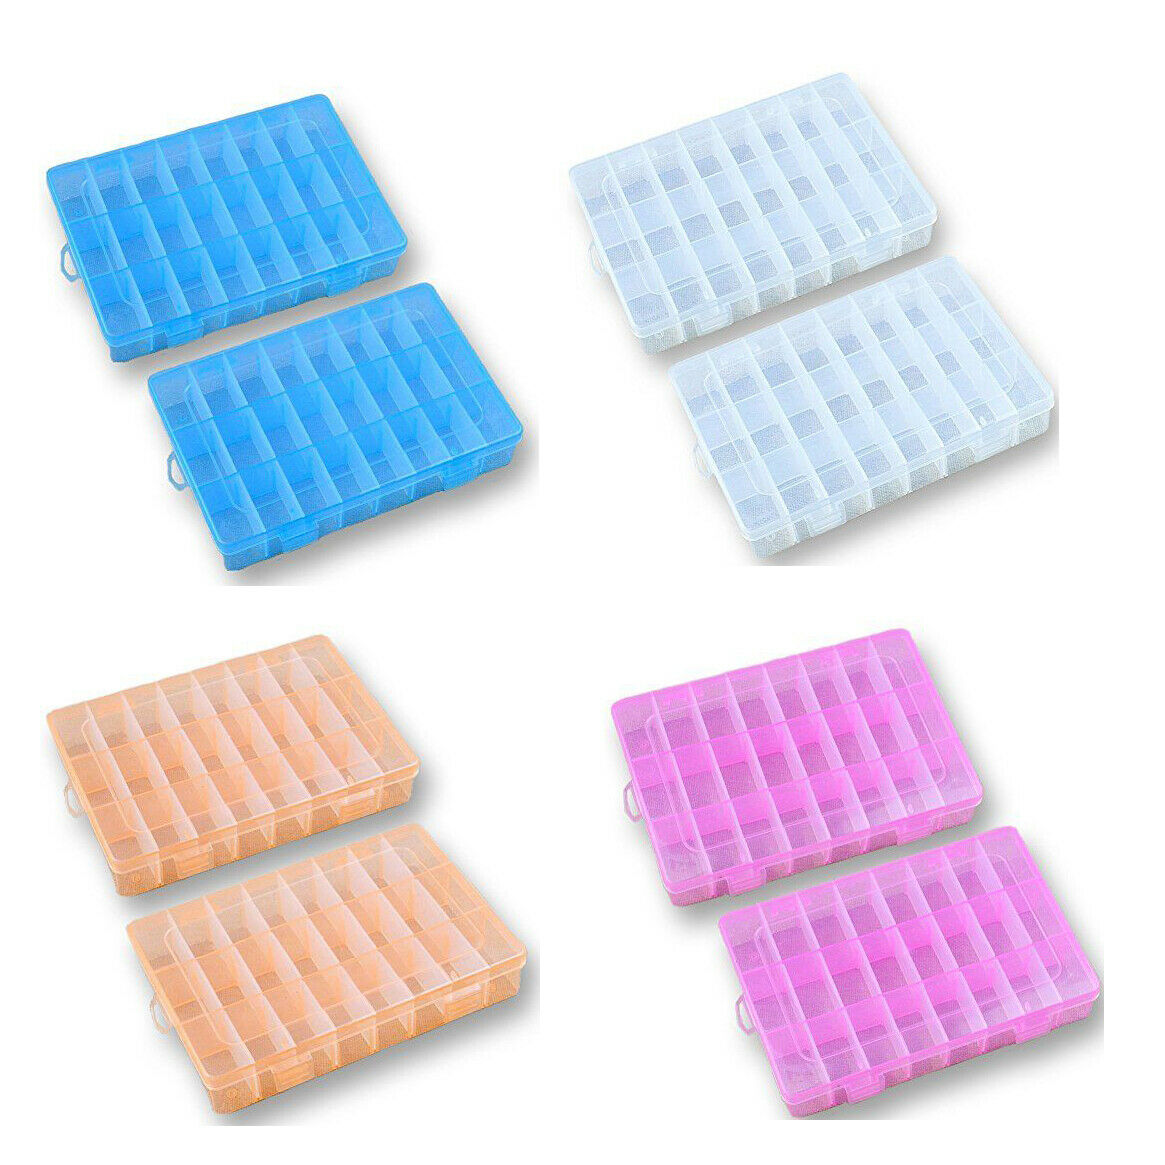 2 Pack 24 Grids Plastic Storage Box Jewelry Earring Tool Containers Organizer